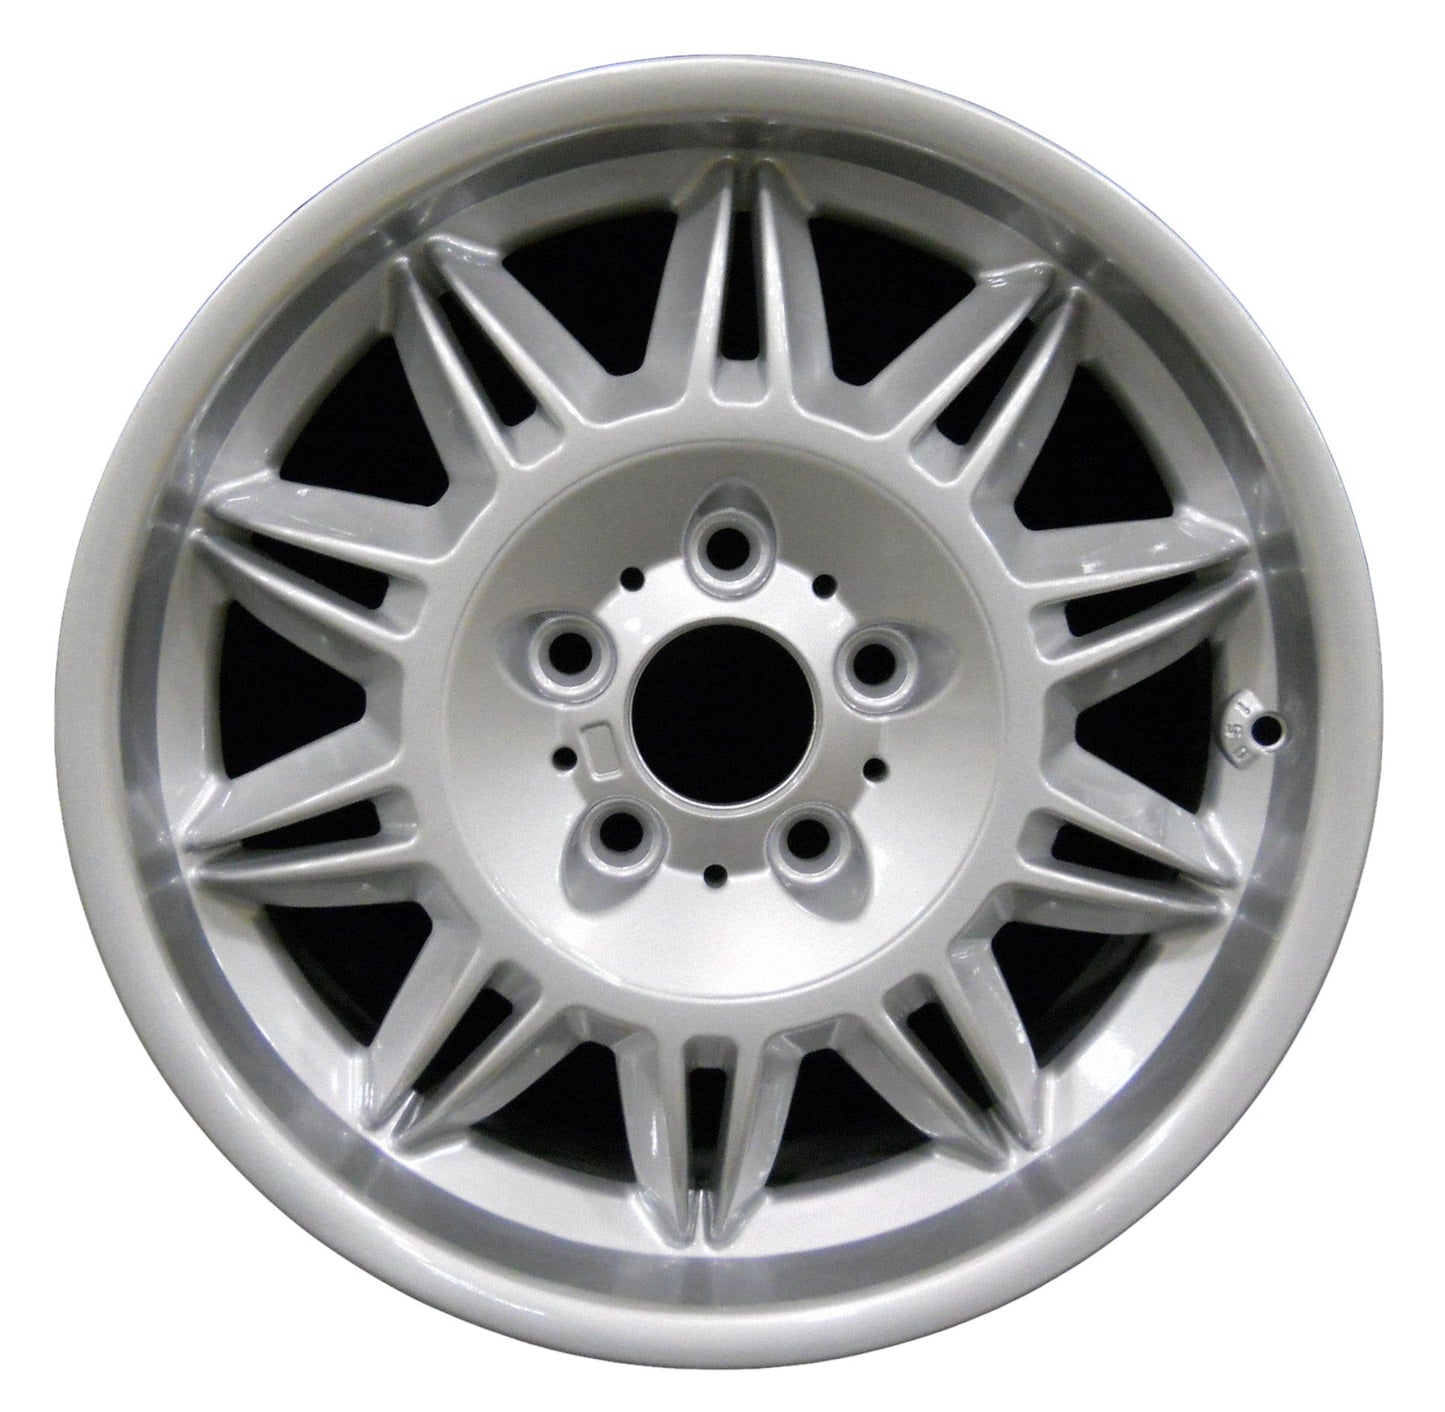 BMW Z3  1998, 1999, 2000, 2001 Factory OEM Car Wheel Size 17x7.5 Alloy WAO.59300FT.PS06.FF